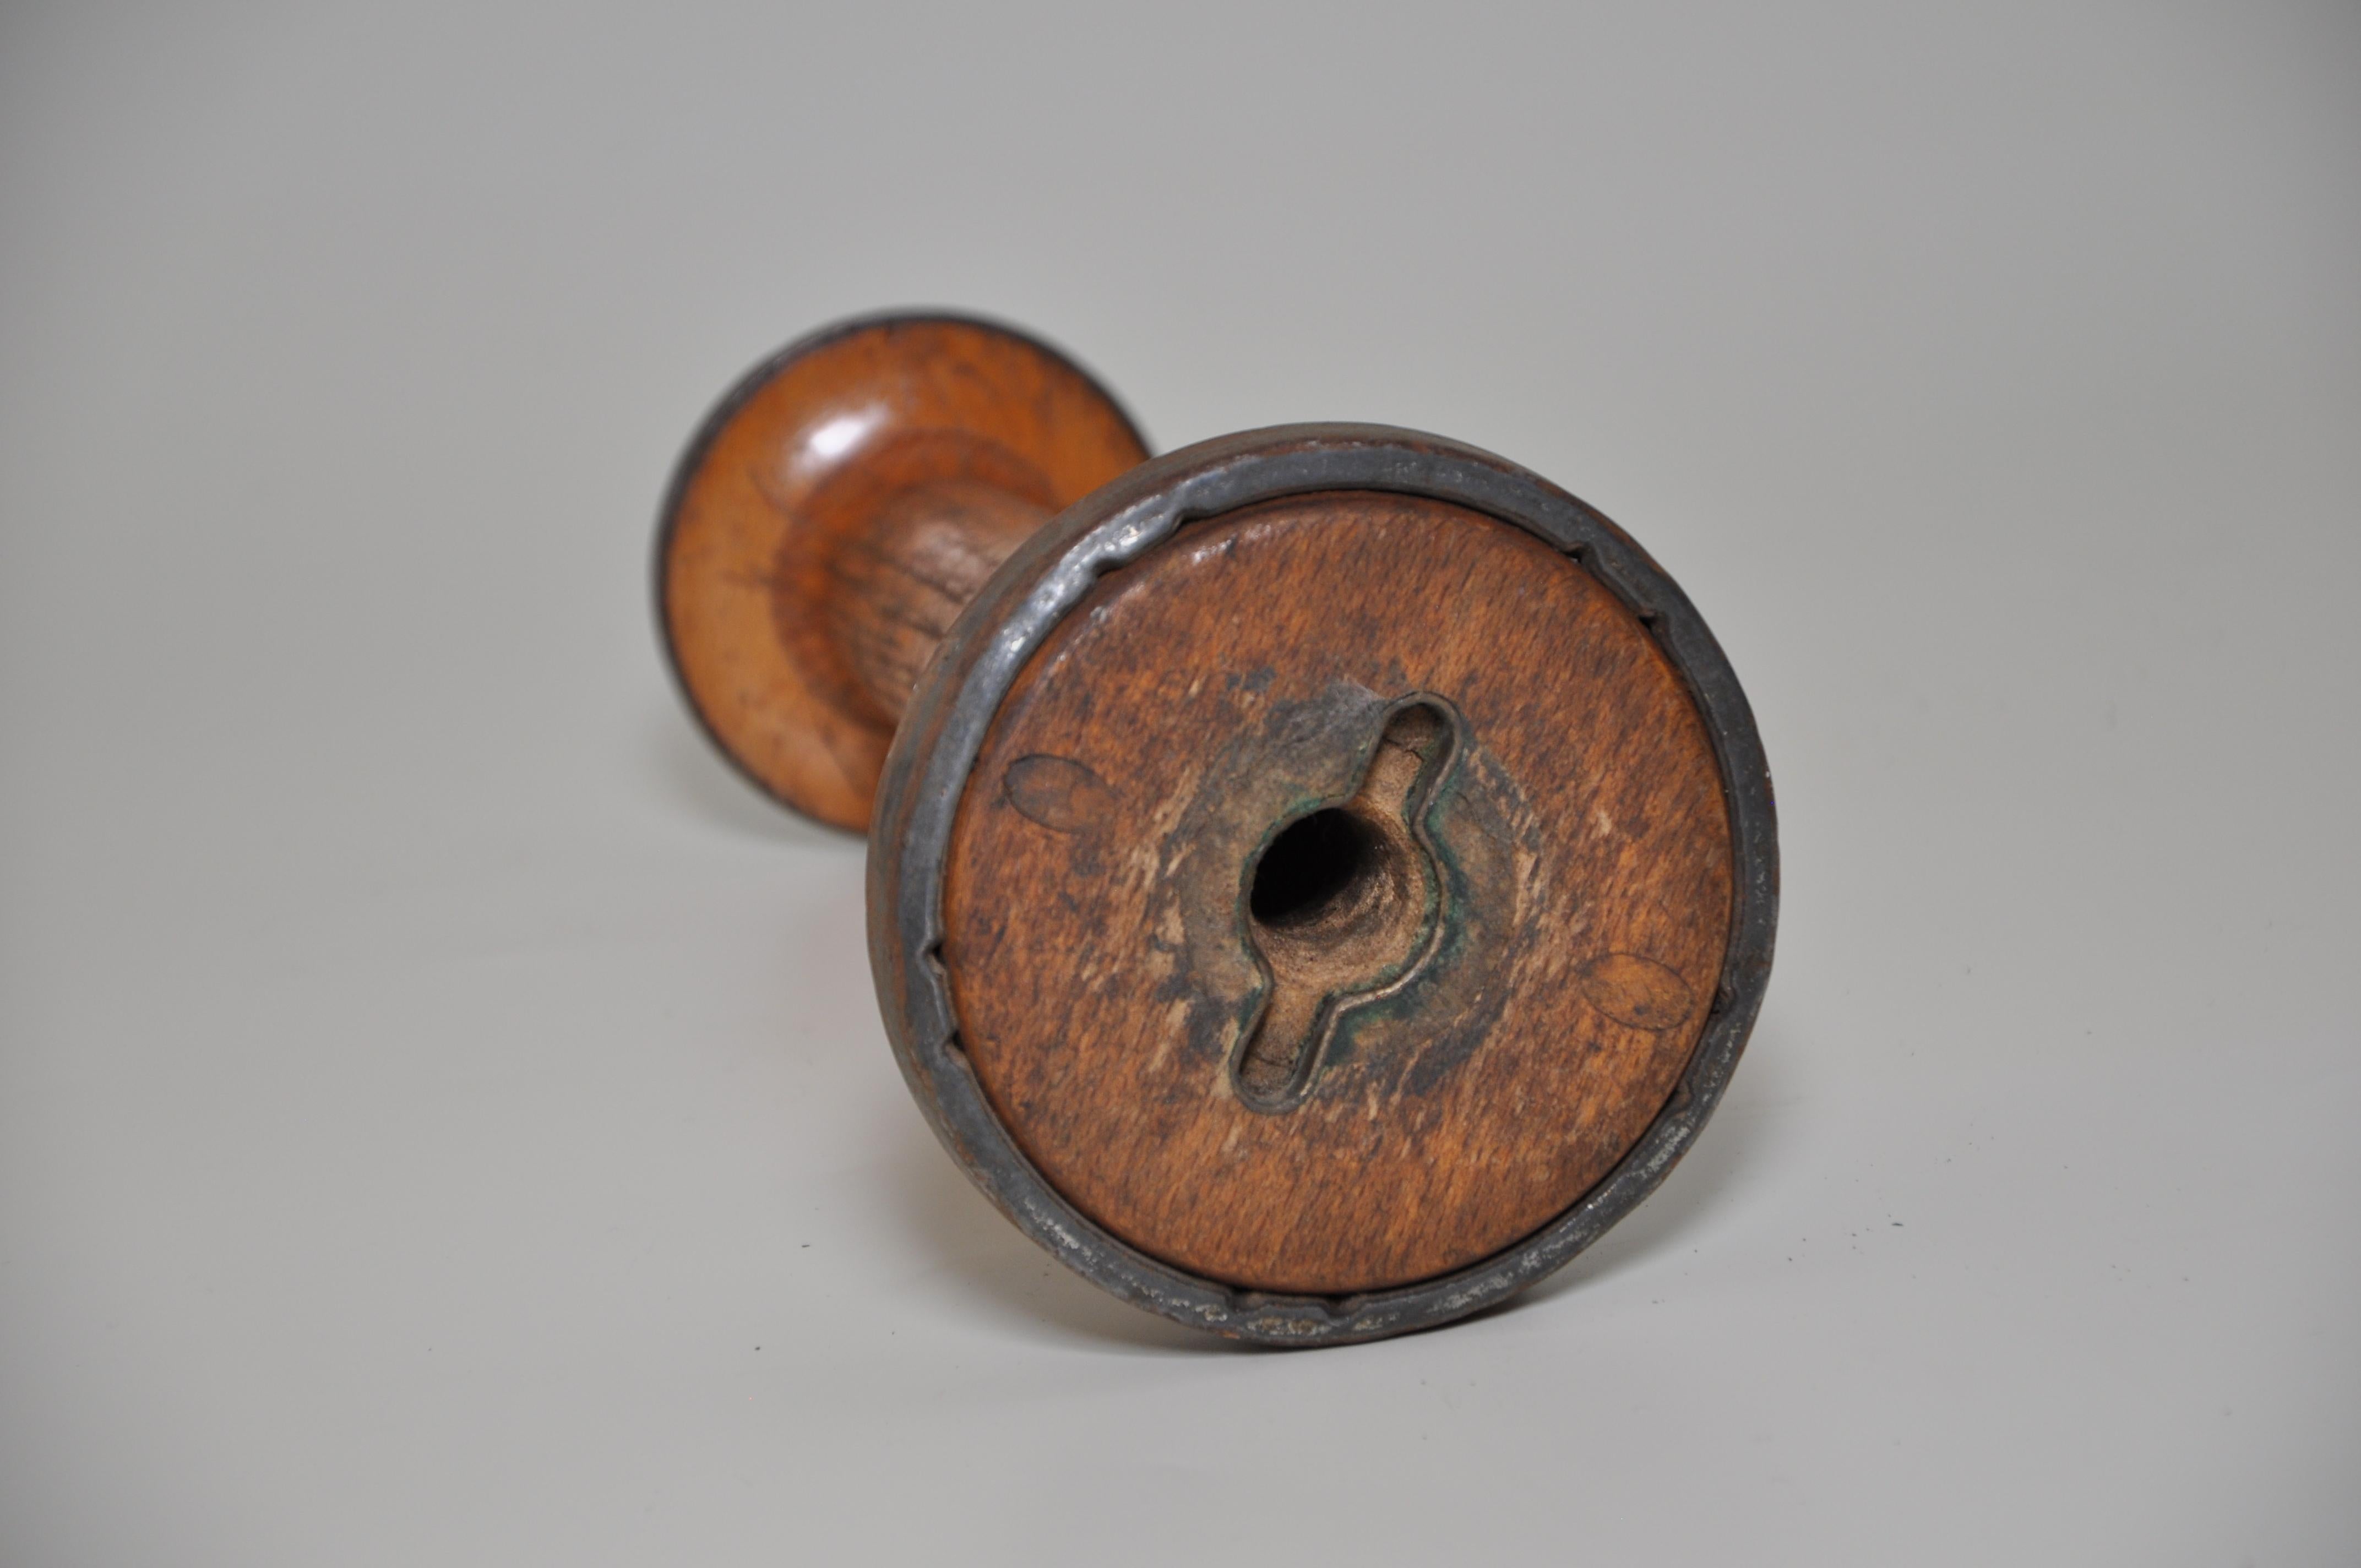 This exquisite wooden spool, or bobbin, is a lovely vintage relic of traditional industrial equipment originally from an old Irish linen mill in Country Antrim, Northern Ireland. Northern Ireland was the home of then Irish Linen industry and Irish